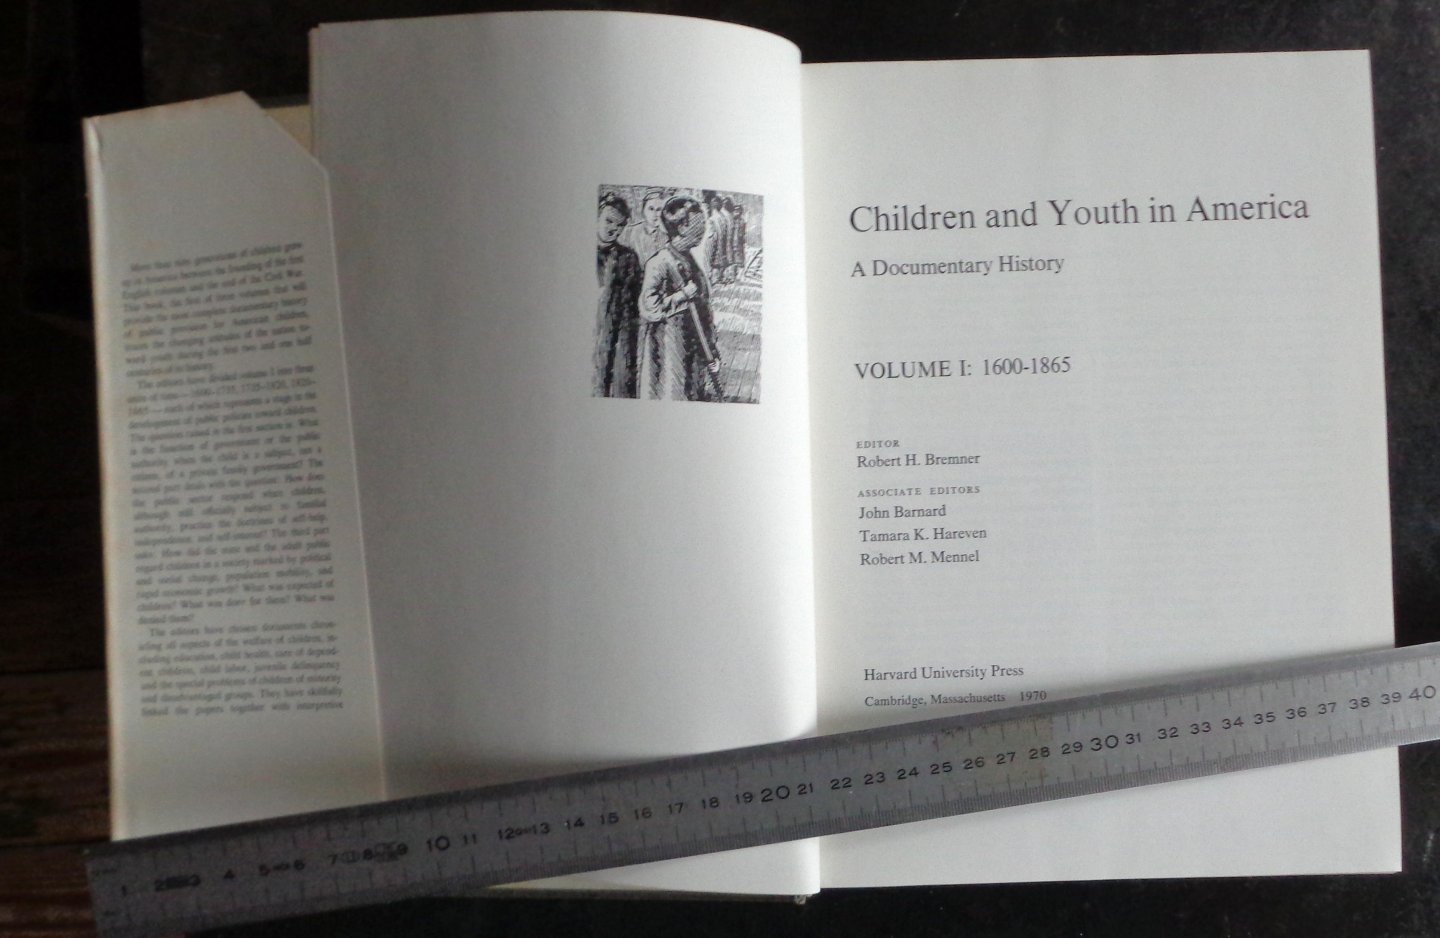 bremner, robert h, editor - children & youth in america, a documentary history Volume I, 1600-1865